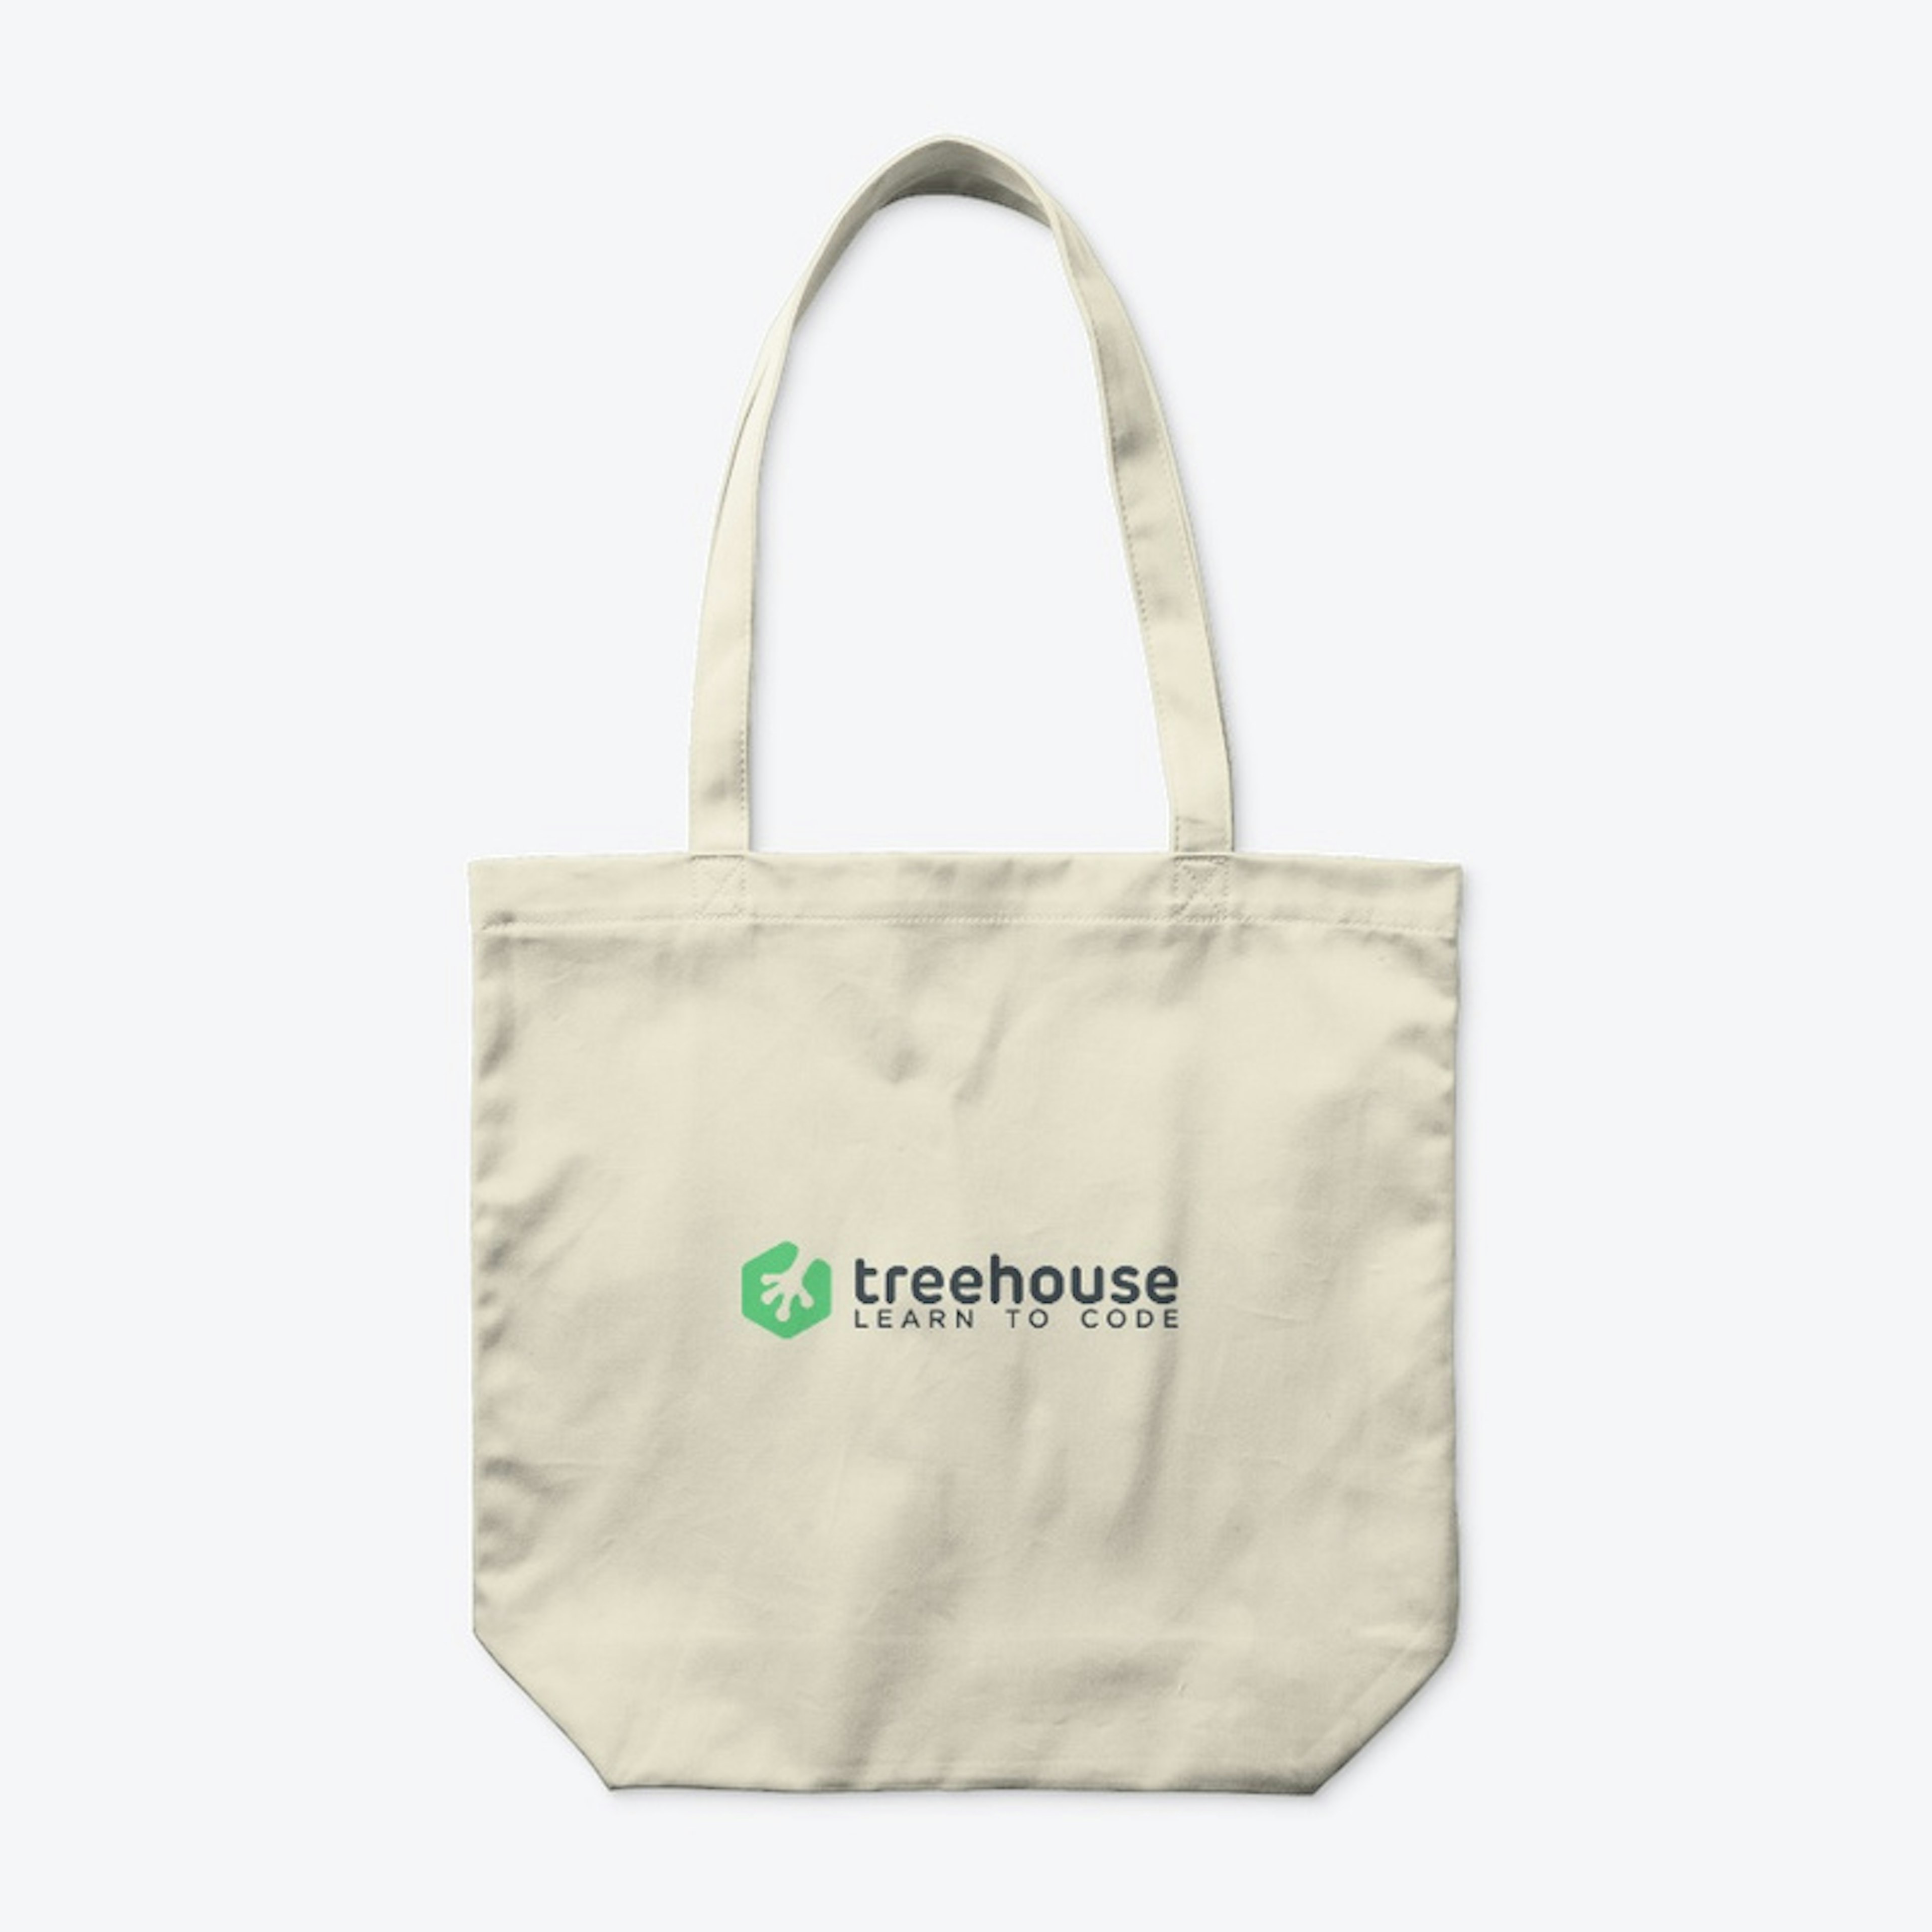 Treehouse - Learn to Code